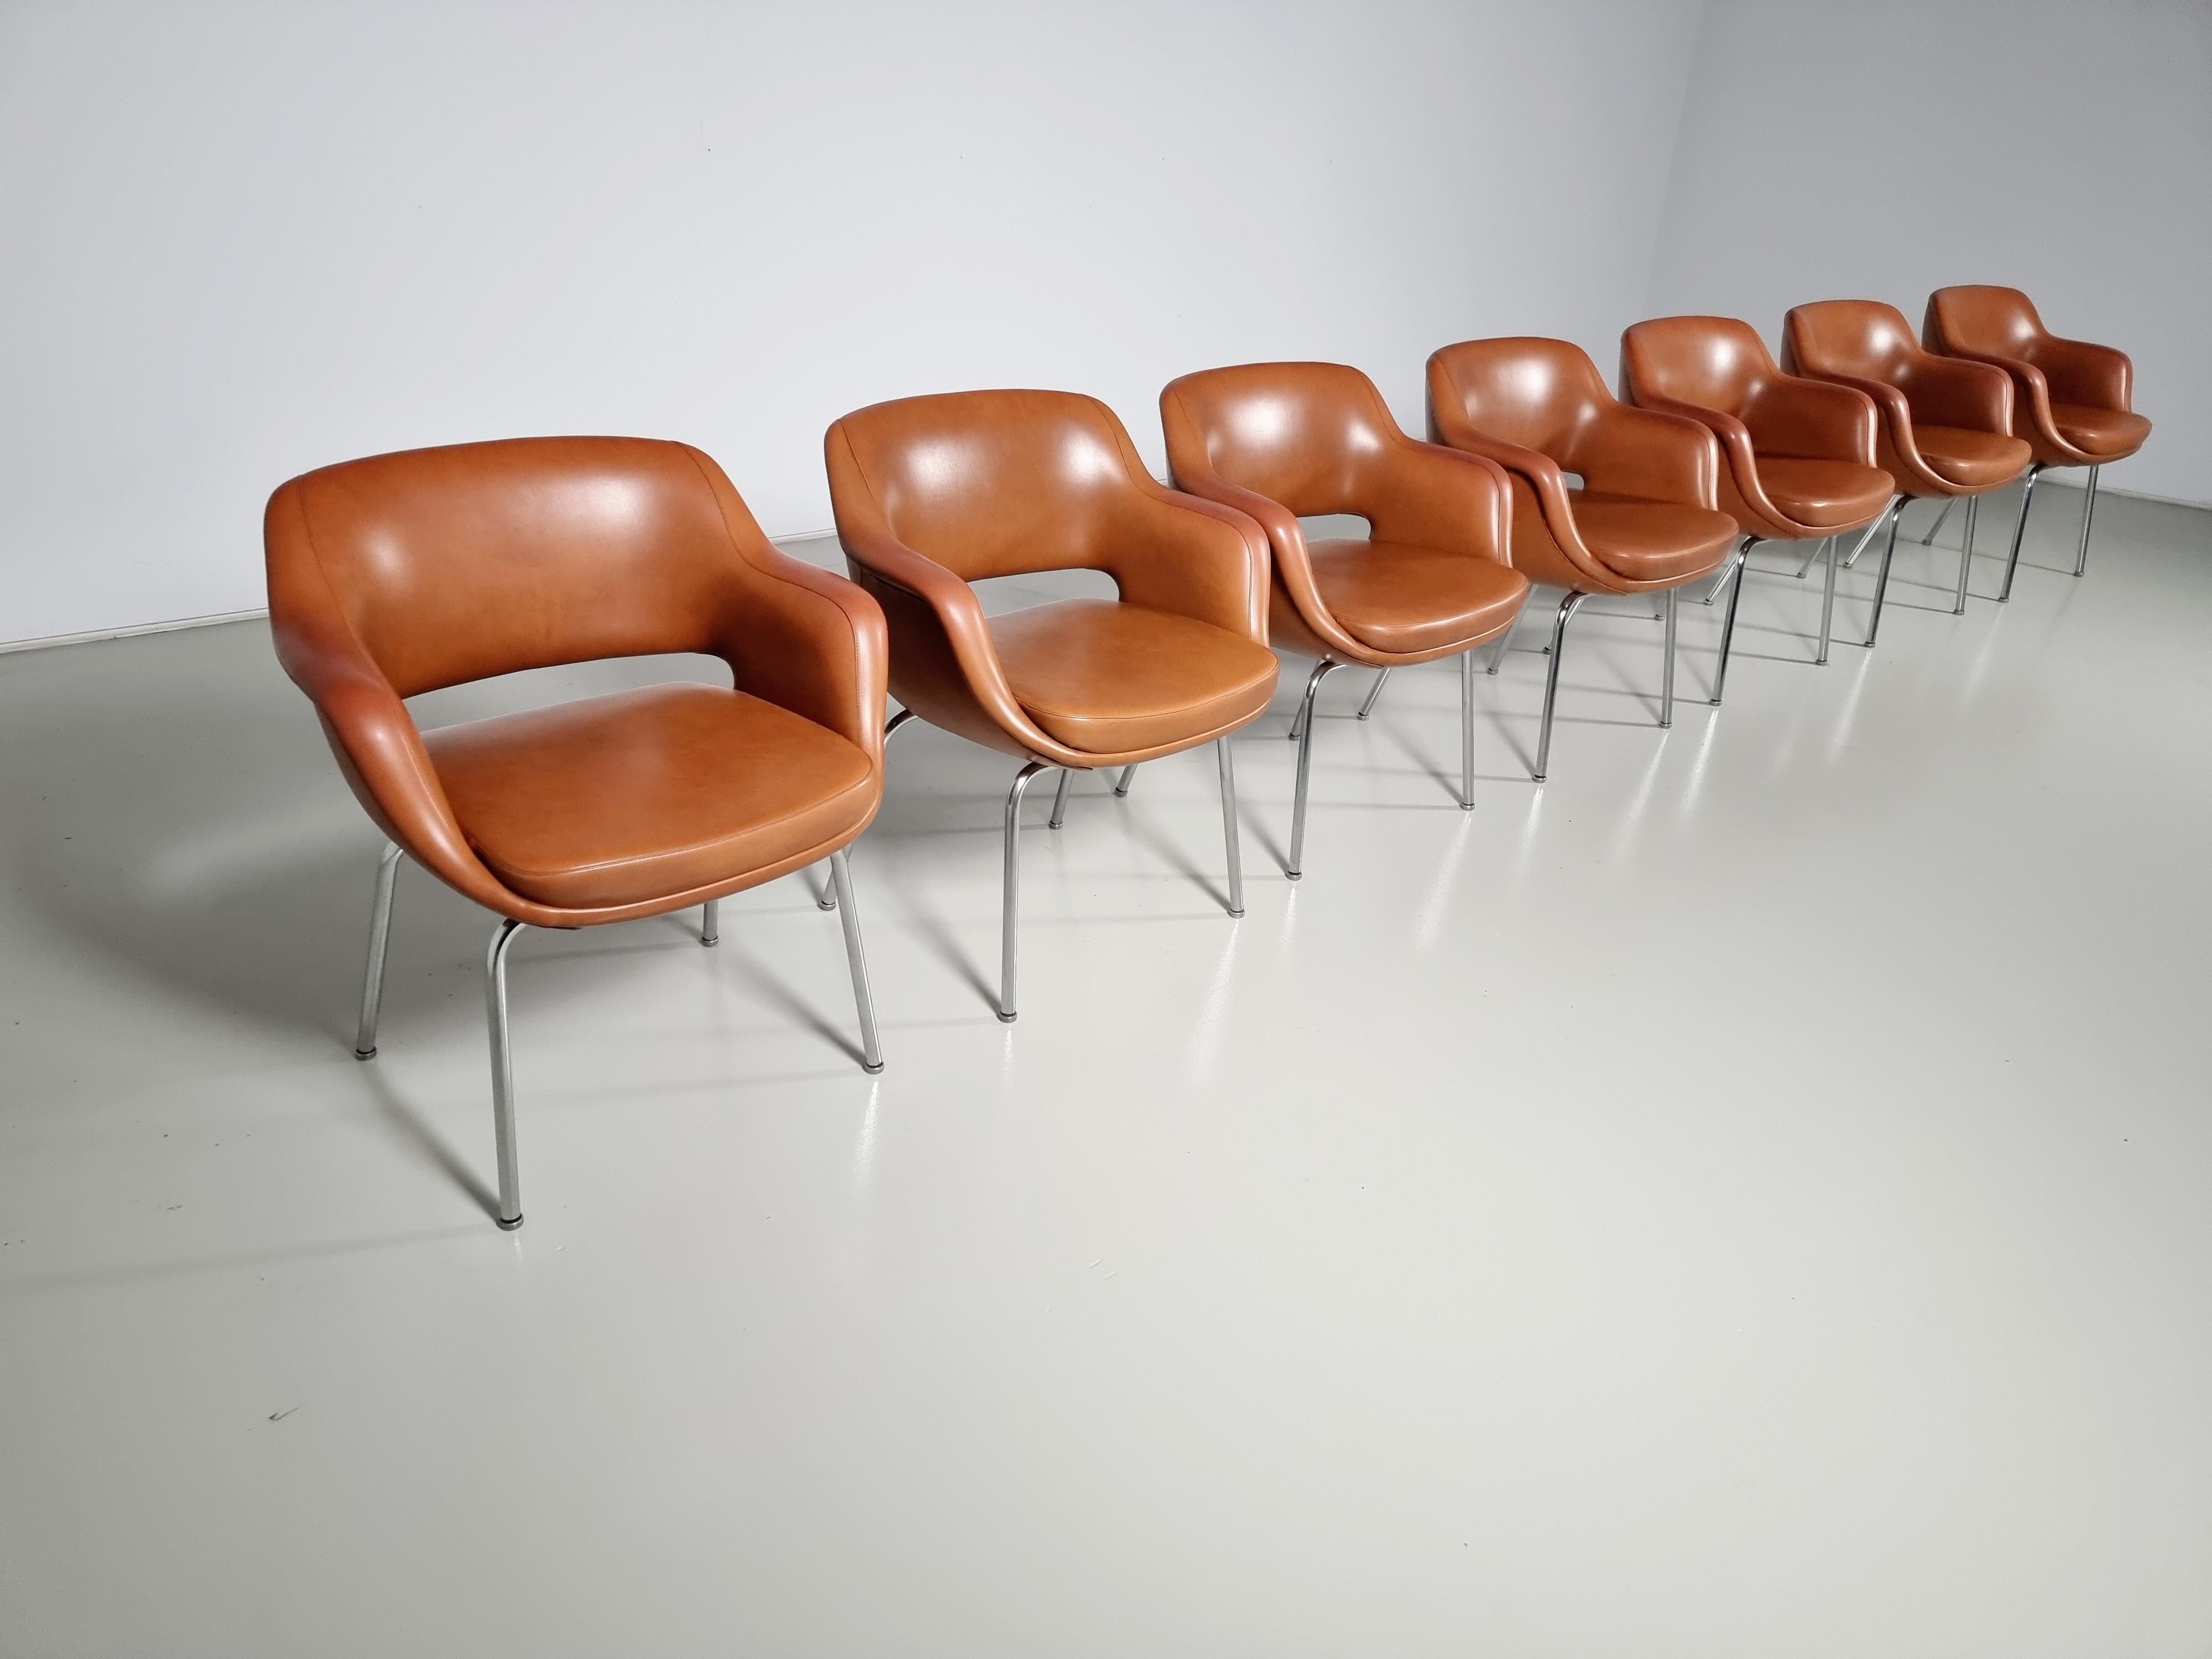 Kilta chair, Olli Mannermaa, Cassina, 1960.

The Kilta chair is a Finnish design Classic. Kilta’s timeless design and very comfortable seating guarantee its continuing popularity. The chair is made of light polystyrene and upholstered in the